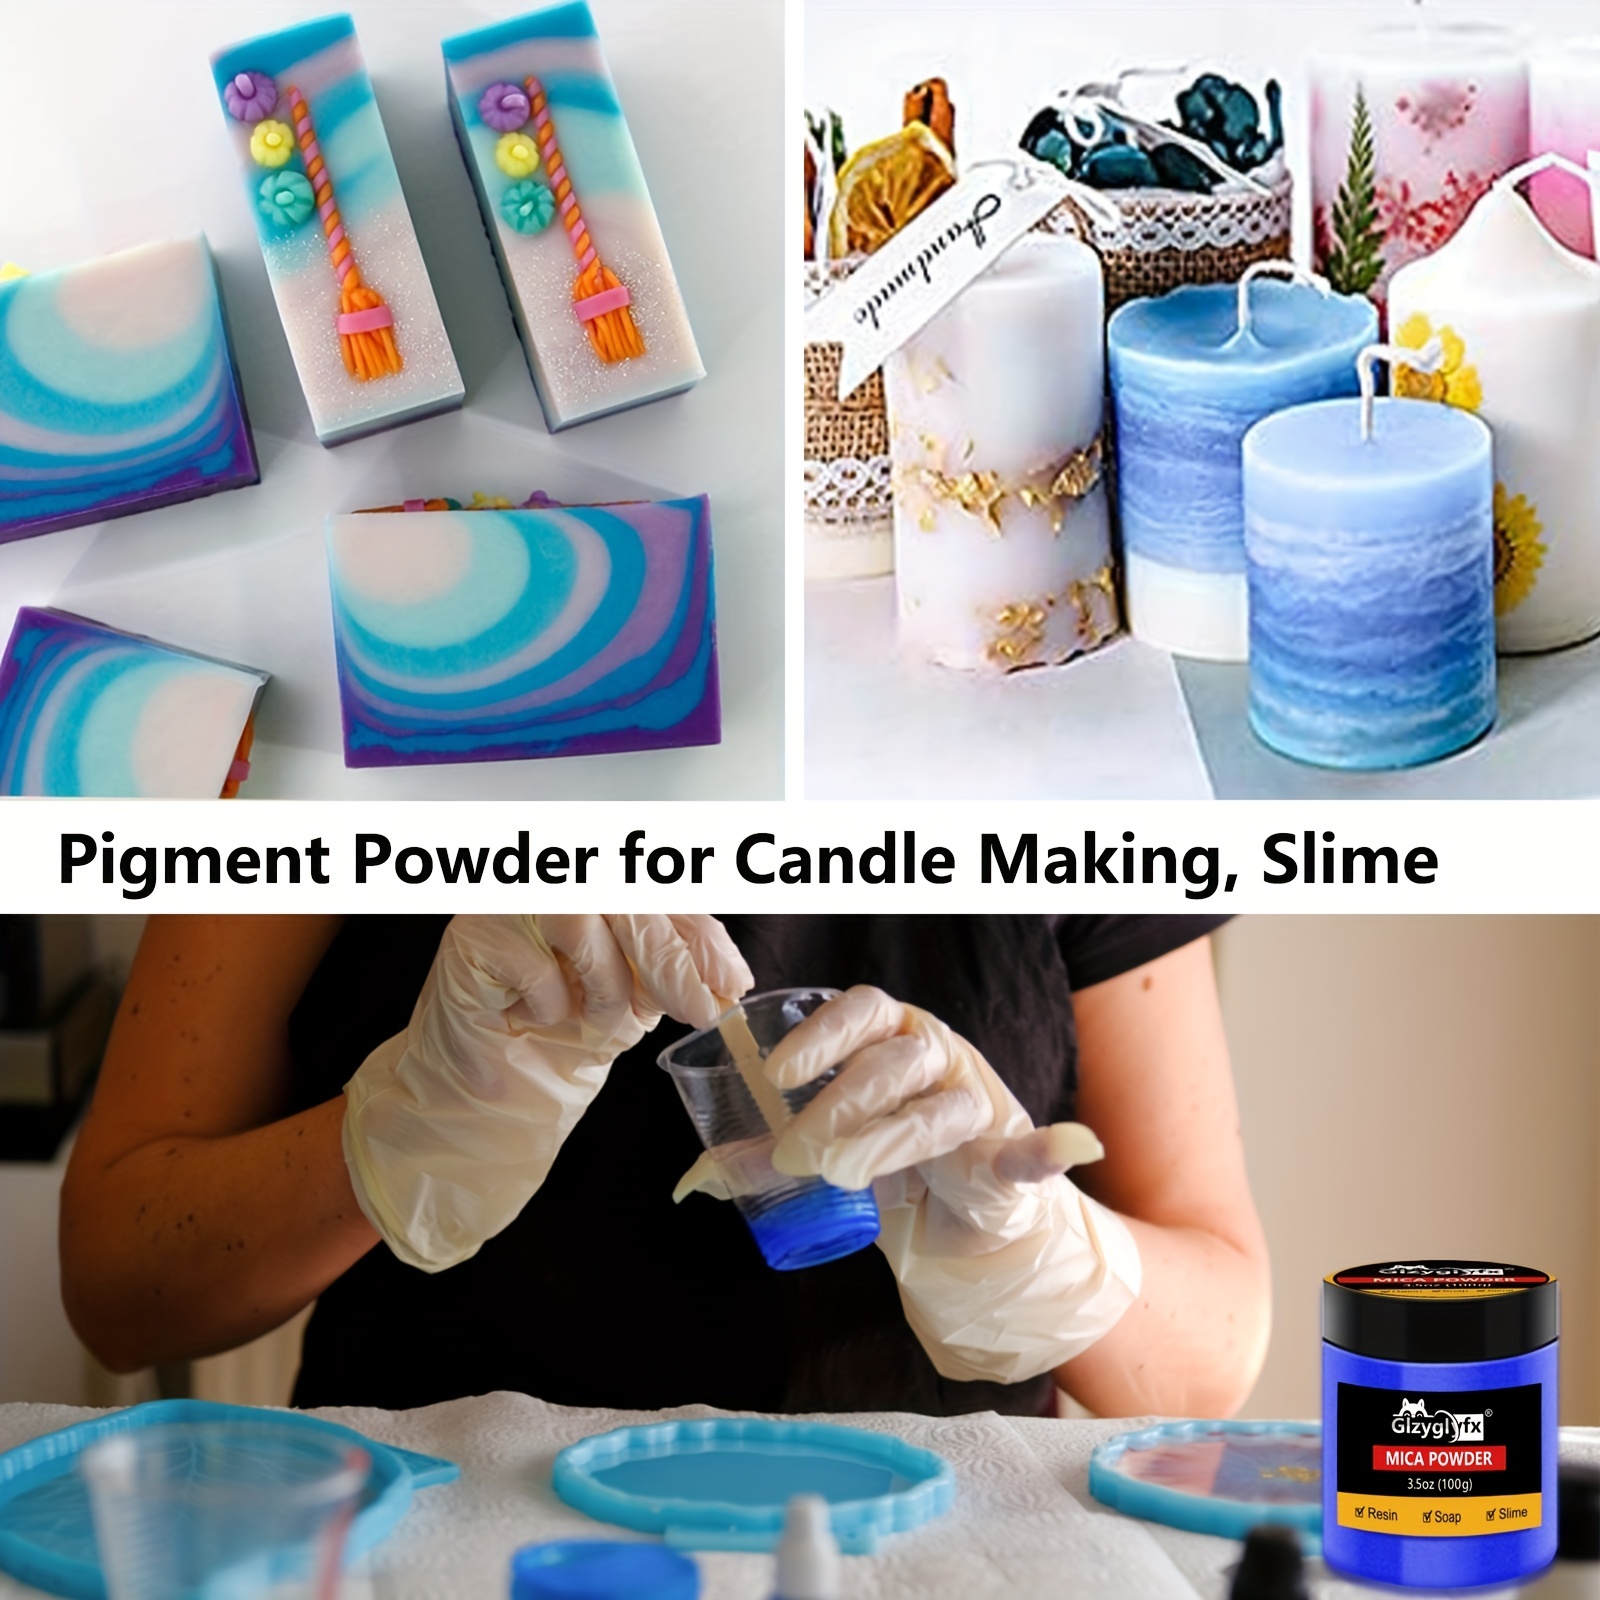 HOW TO MAKE MICA CANDLE, MICA POWDER CANDLE, MICA CANDLE